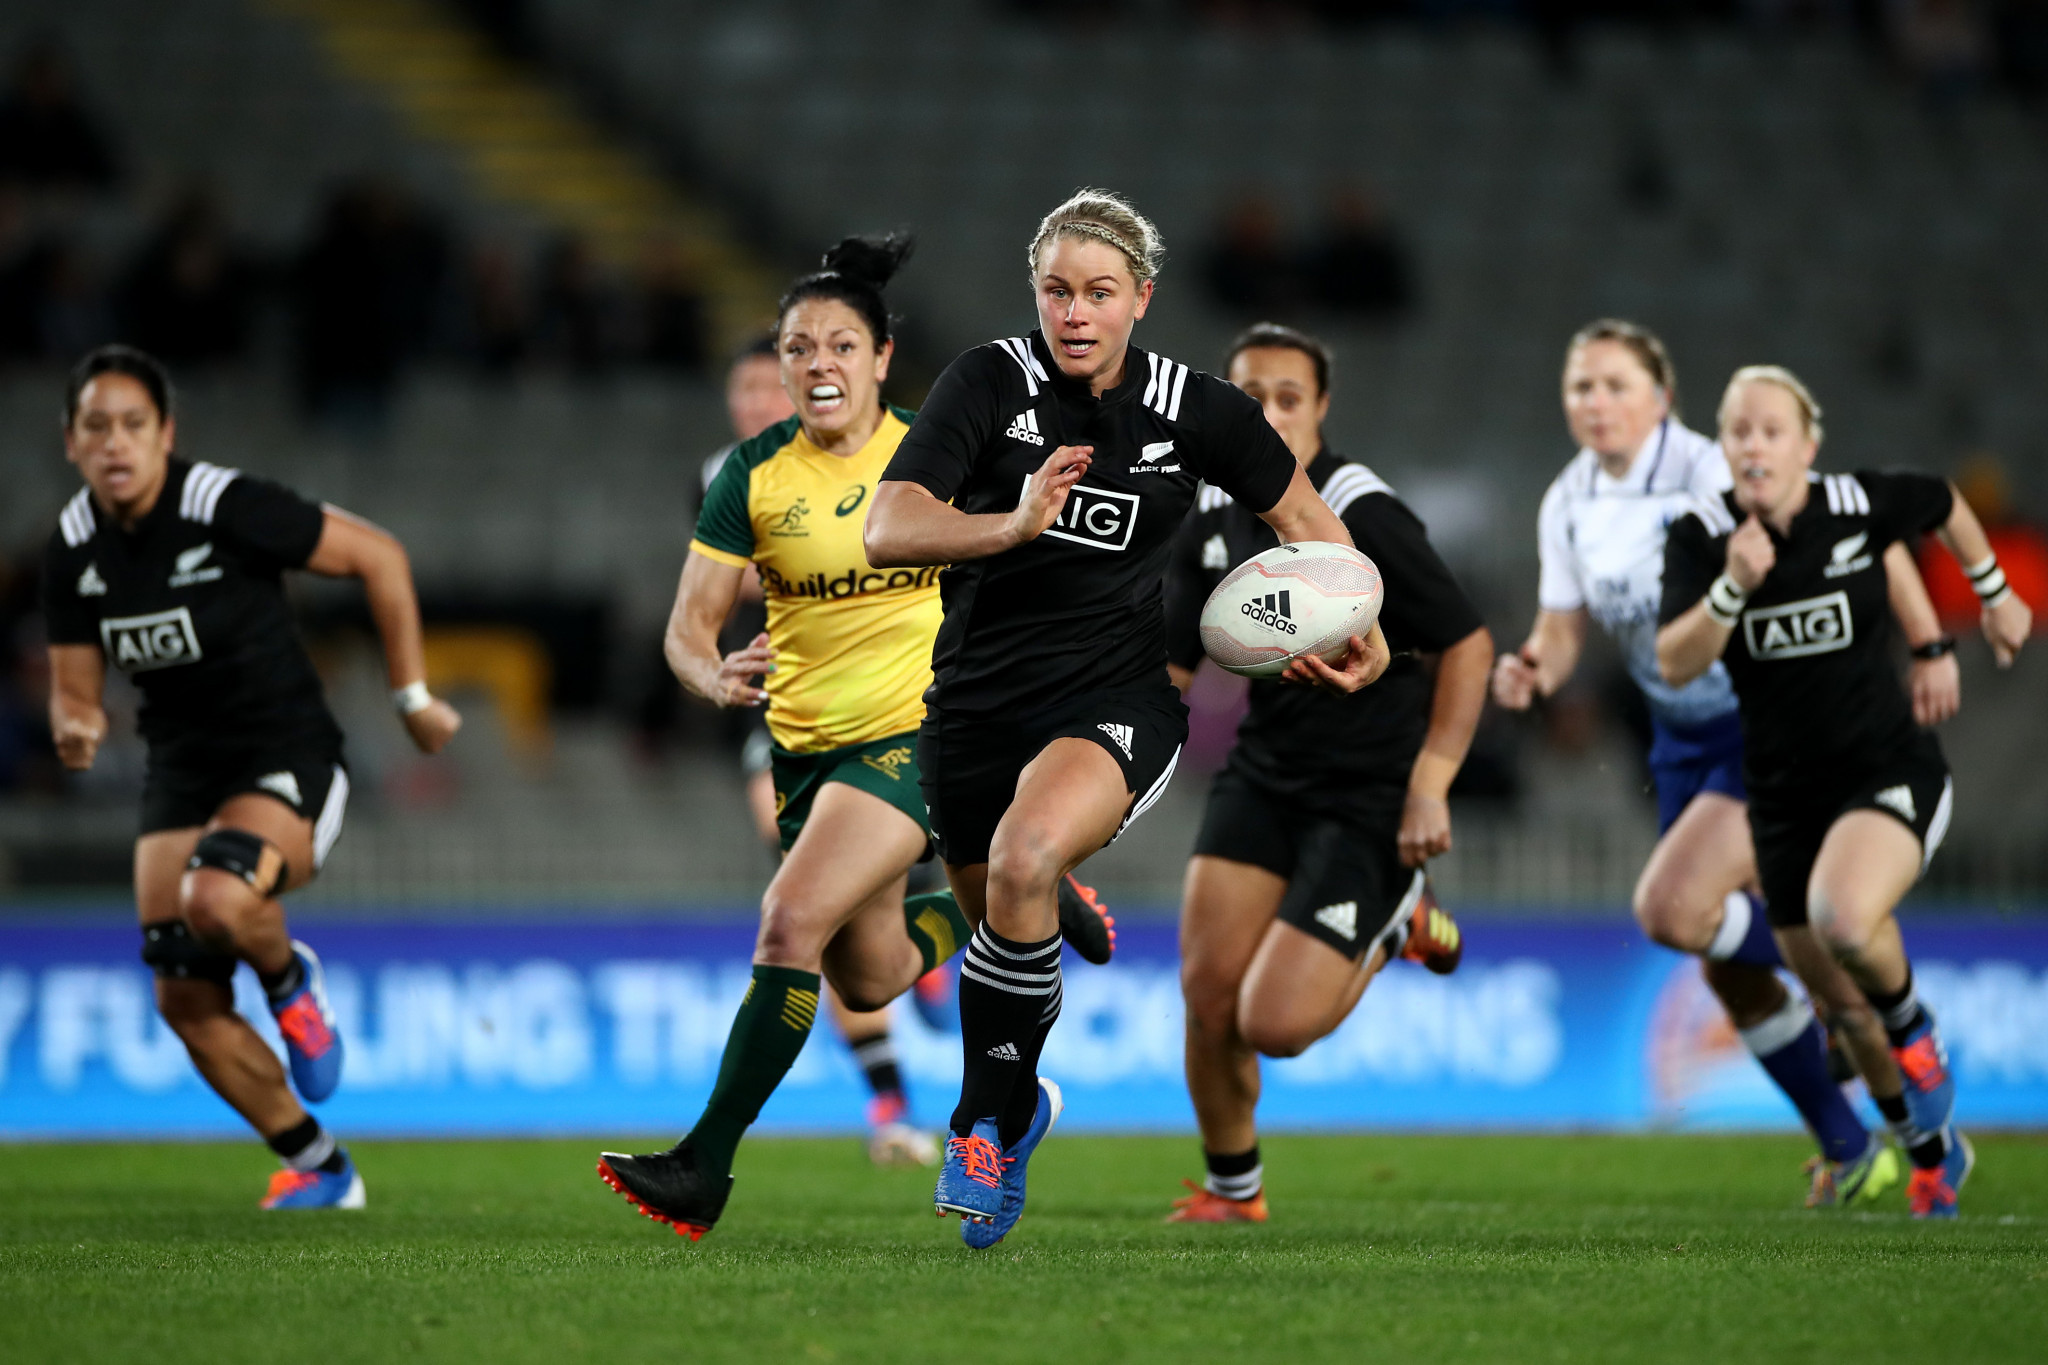 Gender neutral names will come into action for the Rugby World Cup 2021 in New Zealand ©Getty Images